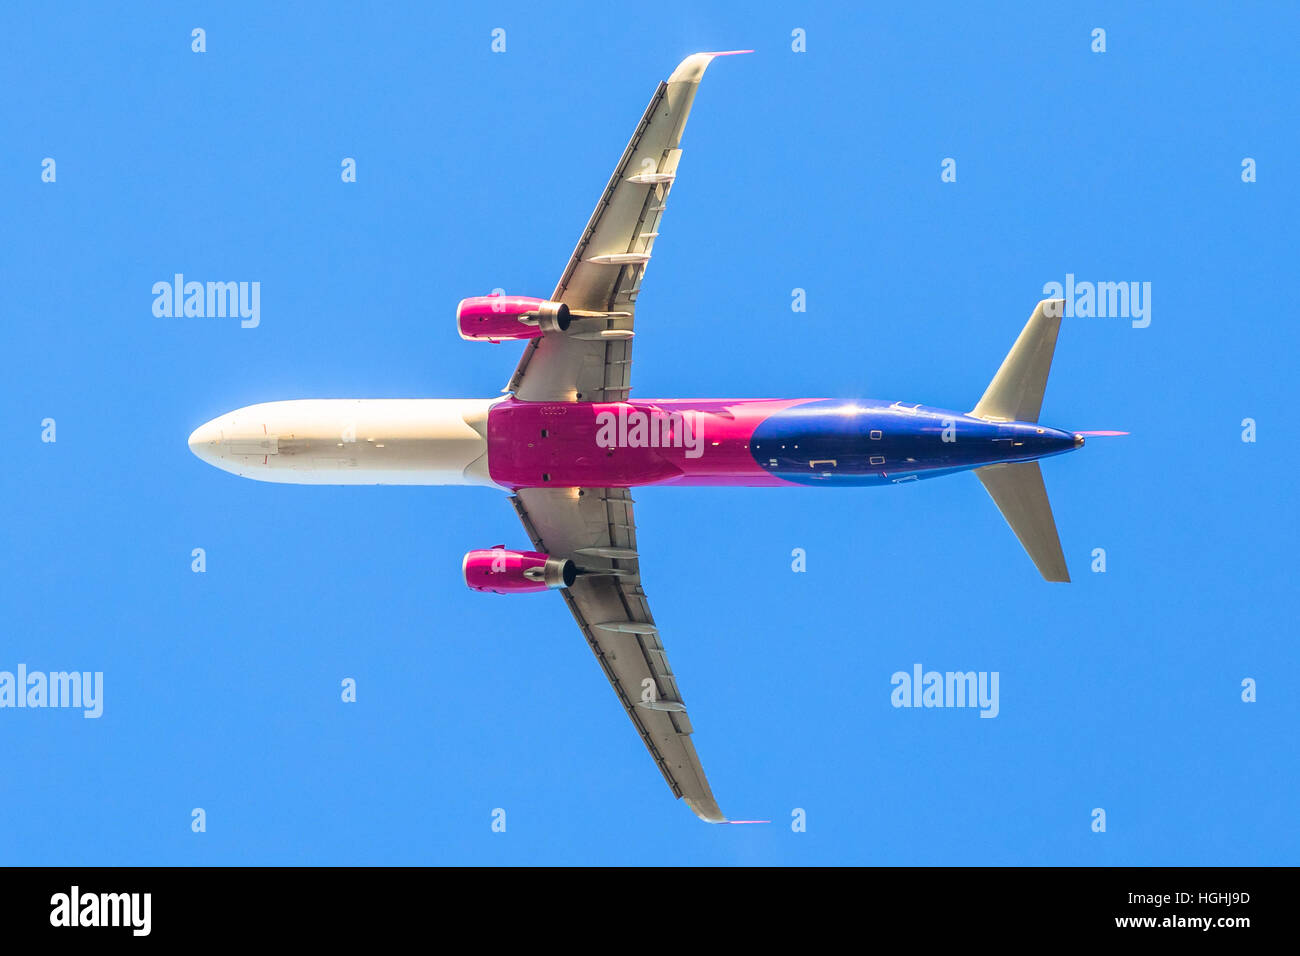 isolated pink airplane Stock Photo